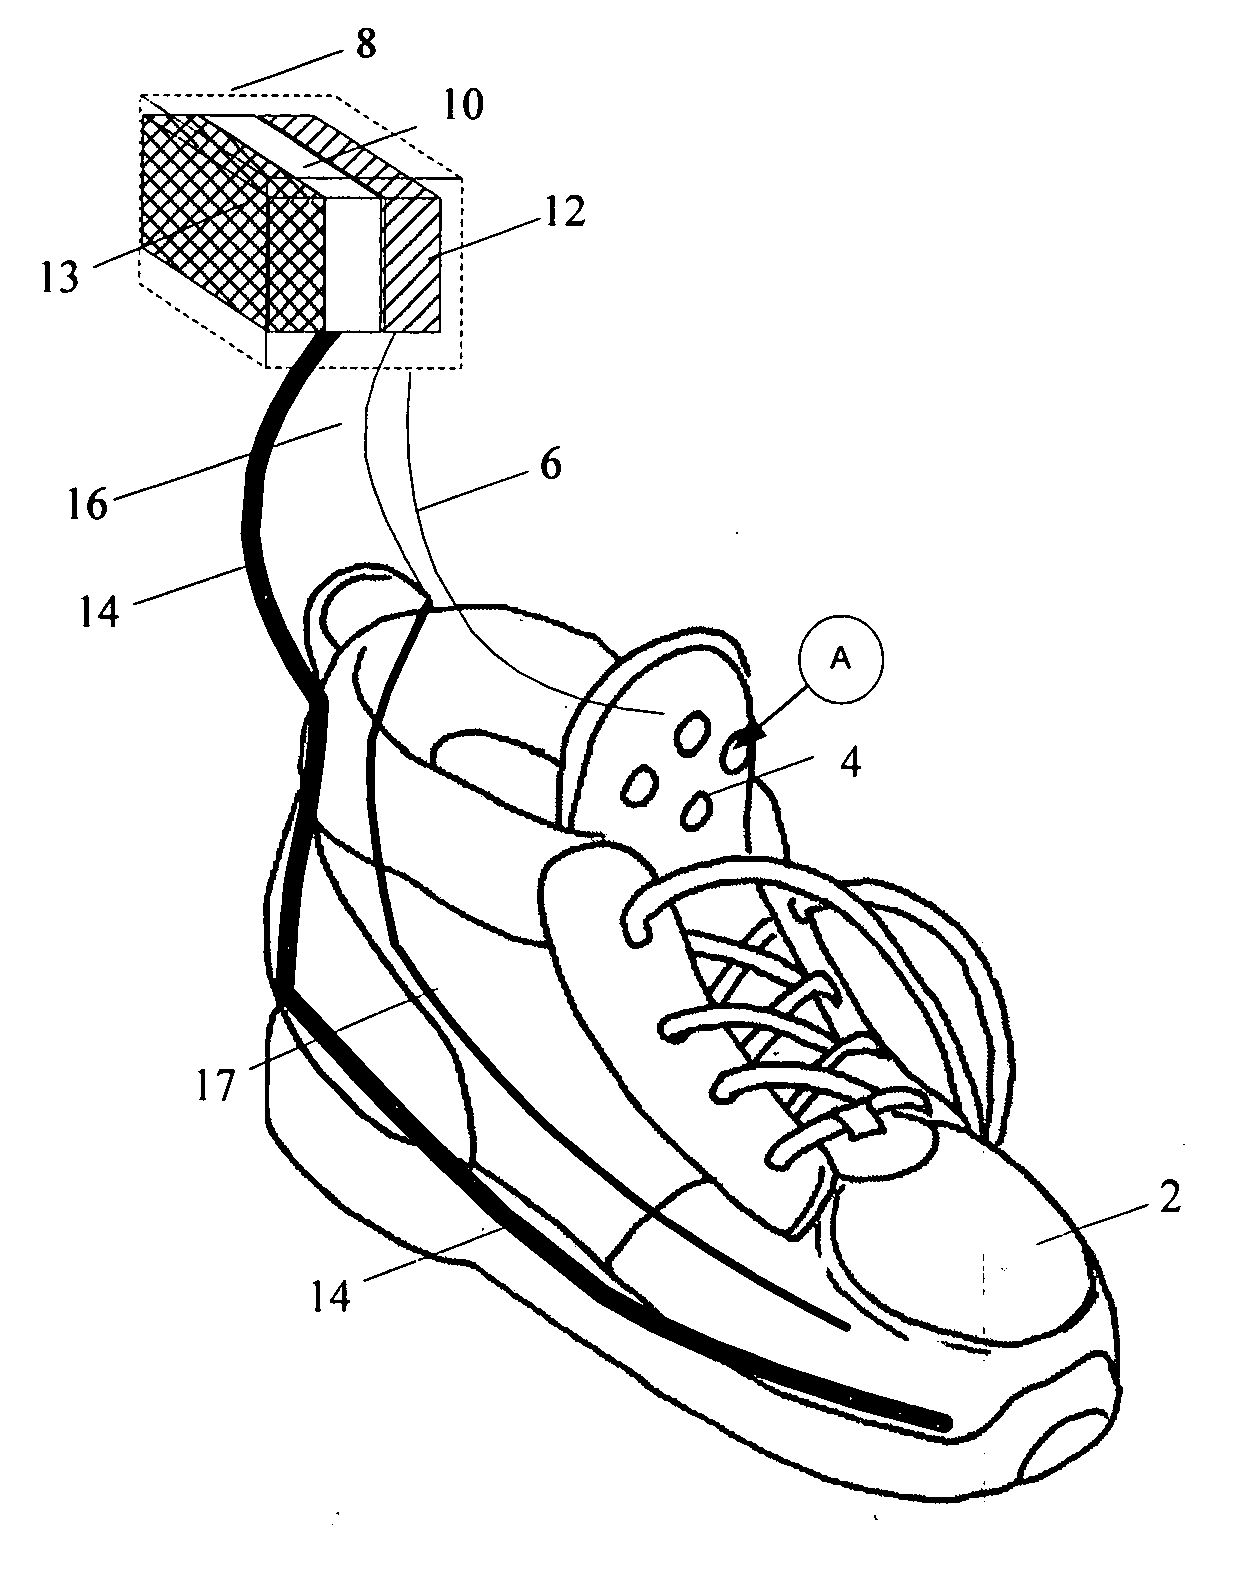 Mechanically heated and cooled shoes with easy-to-use controls